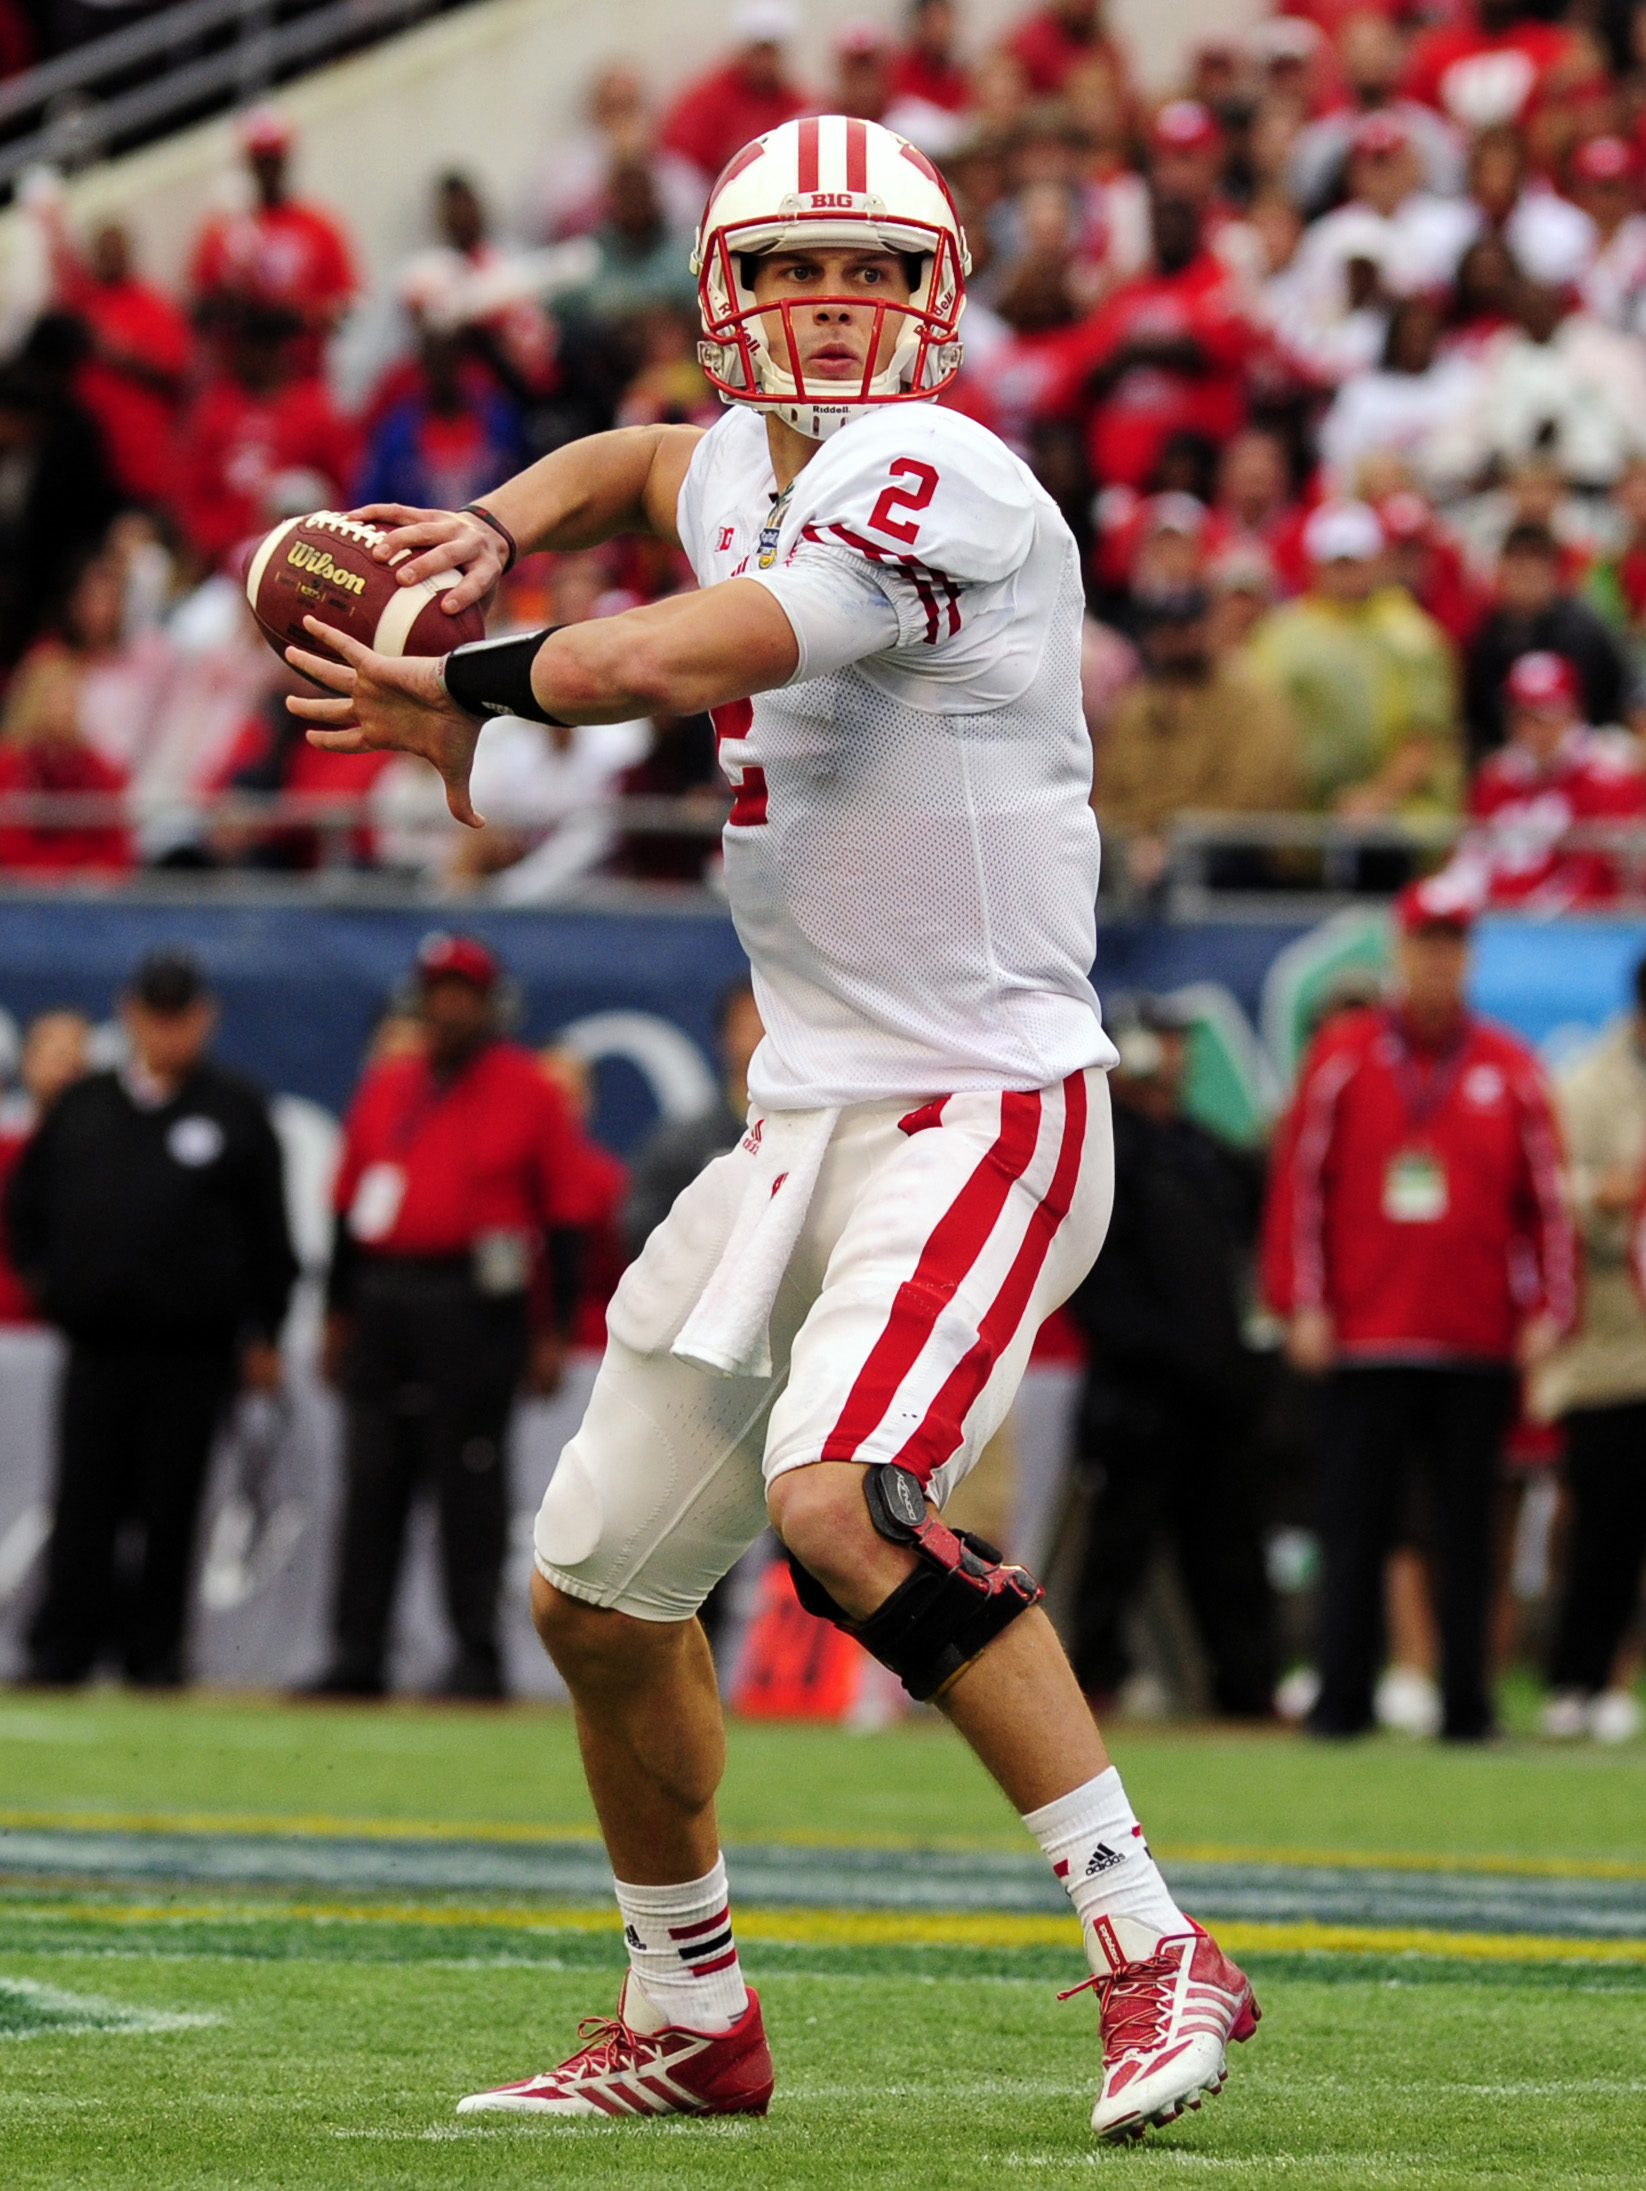 Wisconsin QB Joel Stave says he’s back to his old self